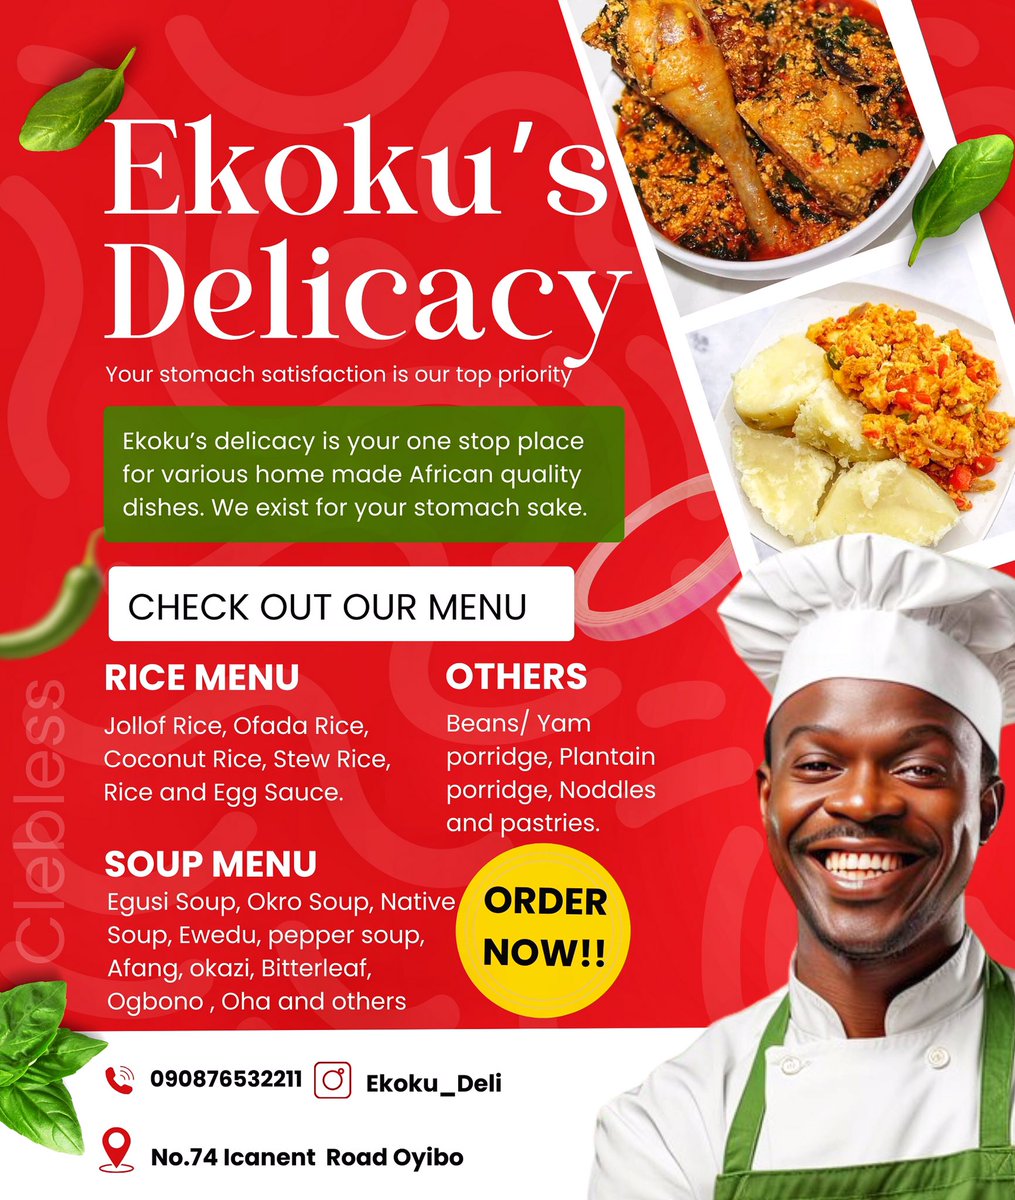 Done cooking 🧑‍🍳 Ekoku’s Delicacy is the best place to get quality African delicacy that taste delicious. In this flyer I decided to explore the male and female version to see which fits best. What do you think?